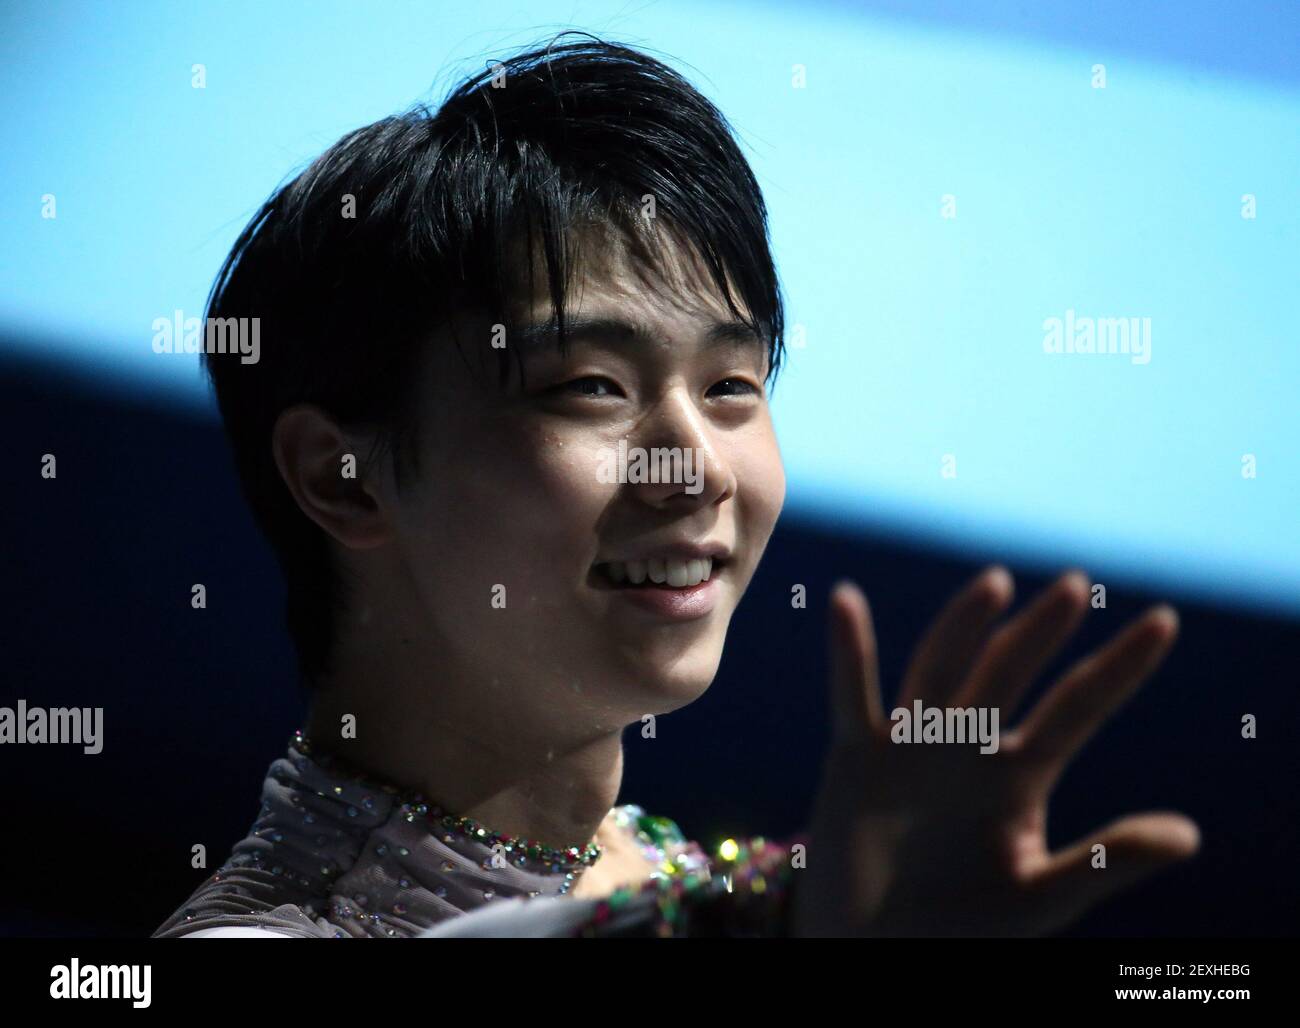 Yuzuru Hanyu, of Japan, celebrates after winning the gold medal in men's figure skating at the Iceberg Skating Palace during the Winter Olympics in Sochi, Russia, Friday, Feb. 14, 2014. (Photo by Brian Cassella/Chicago Tribune/TNS/Sipa USA) Stock Photo